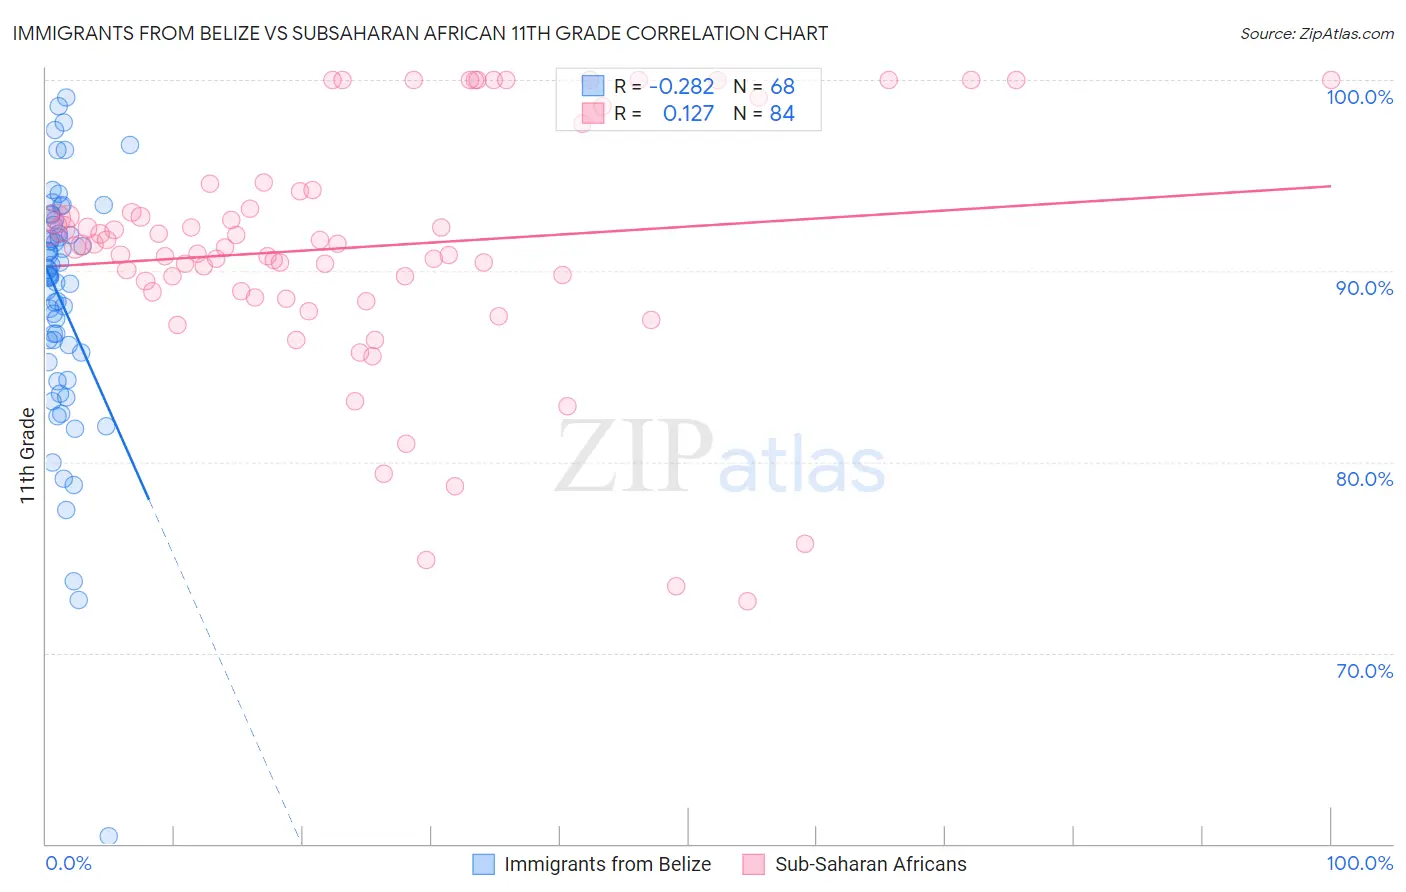 Immigrants from Belize vs Subsaharan African 11th Grade